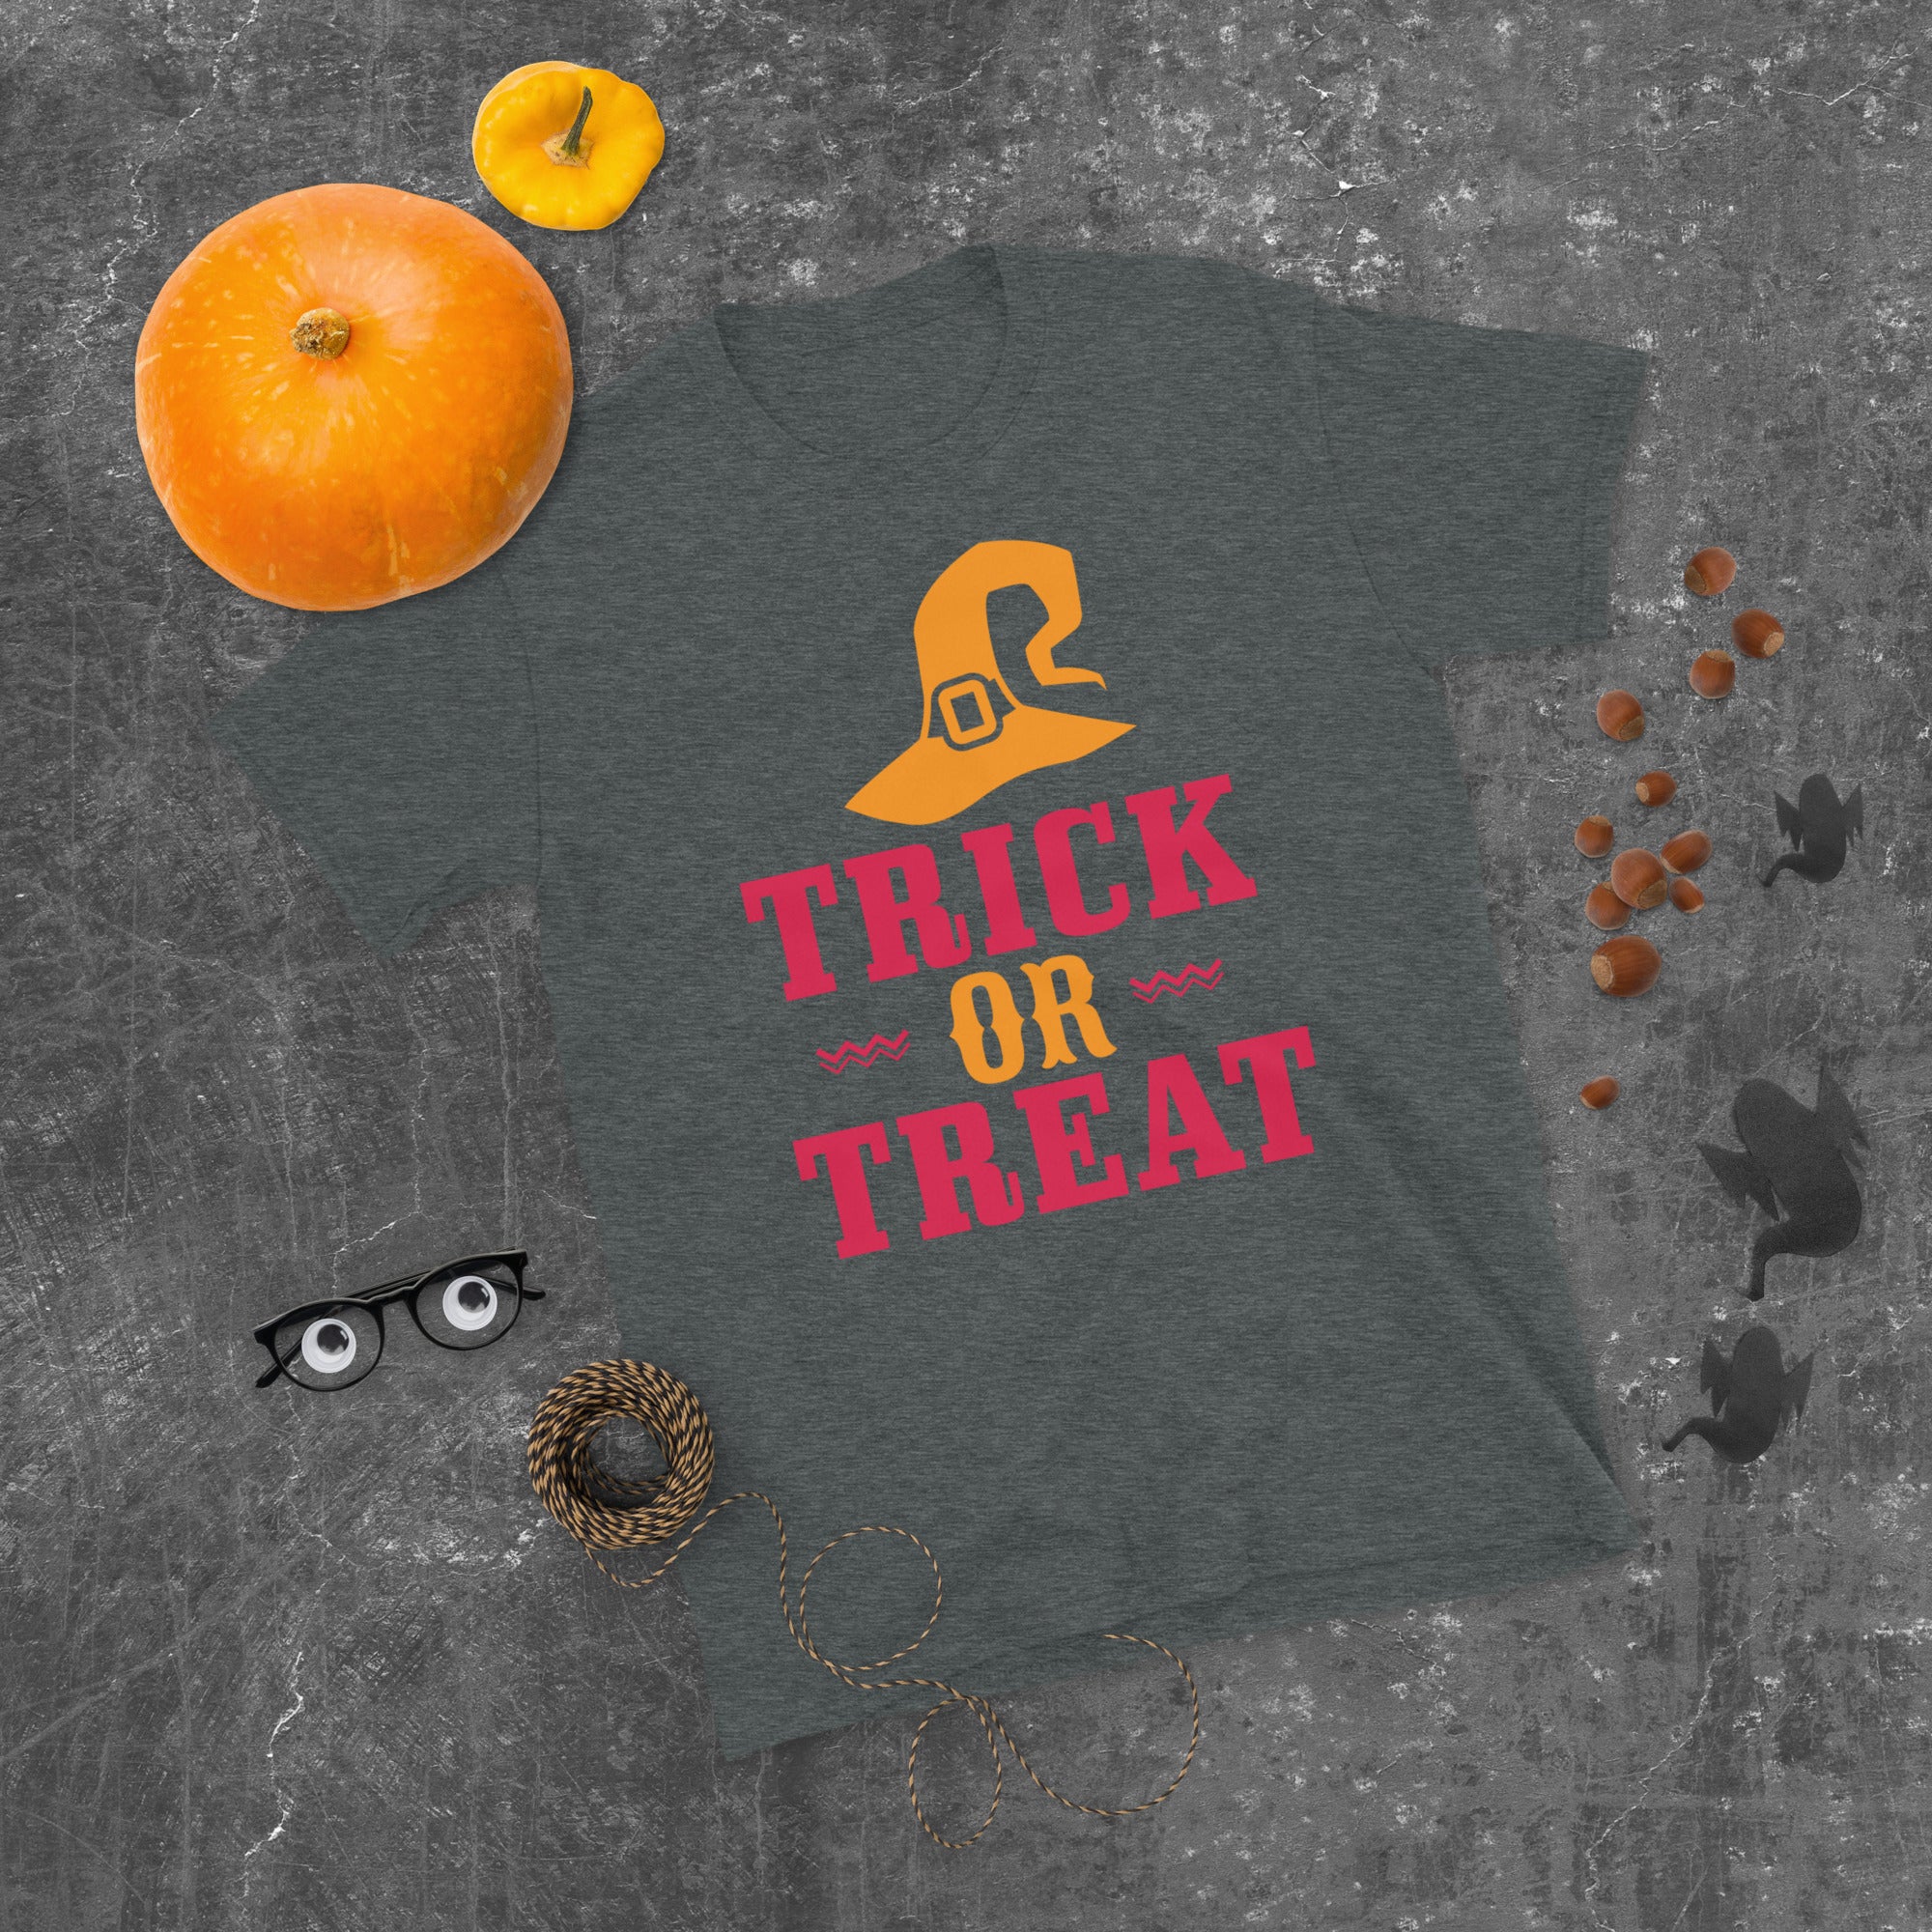 Trick Or Treat Short-Sleeve With Witches Hat T-Shirt